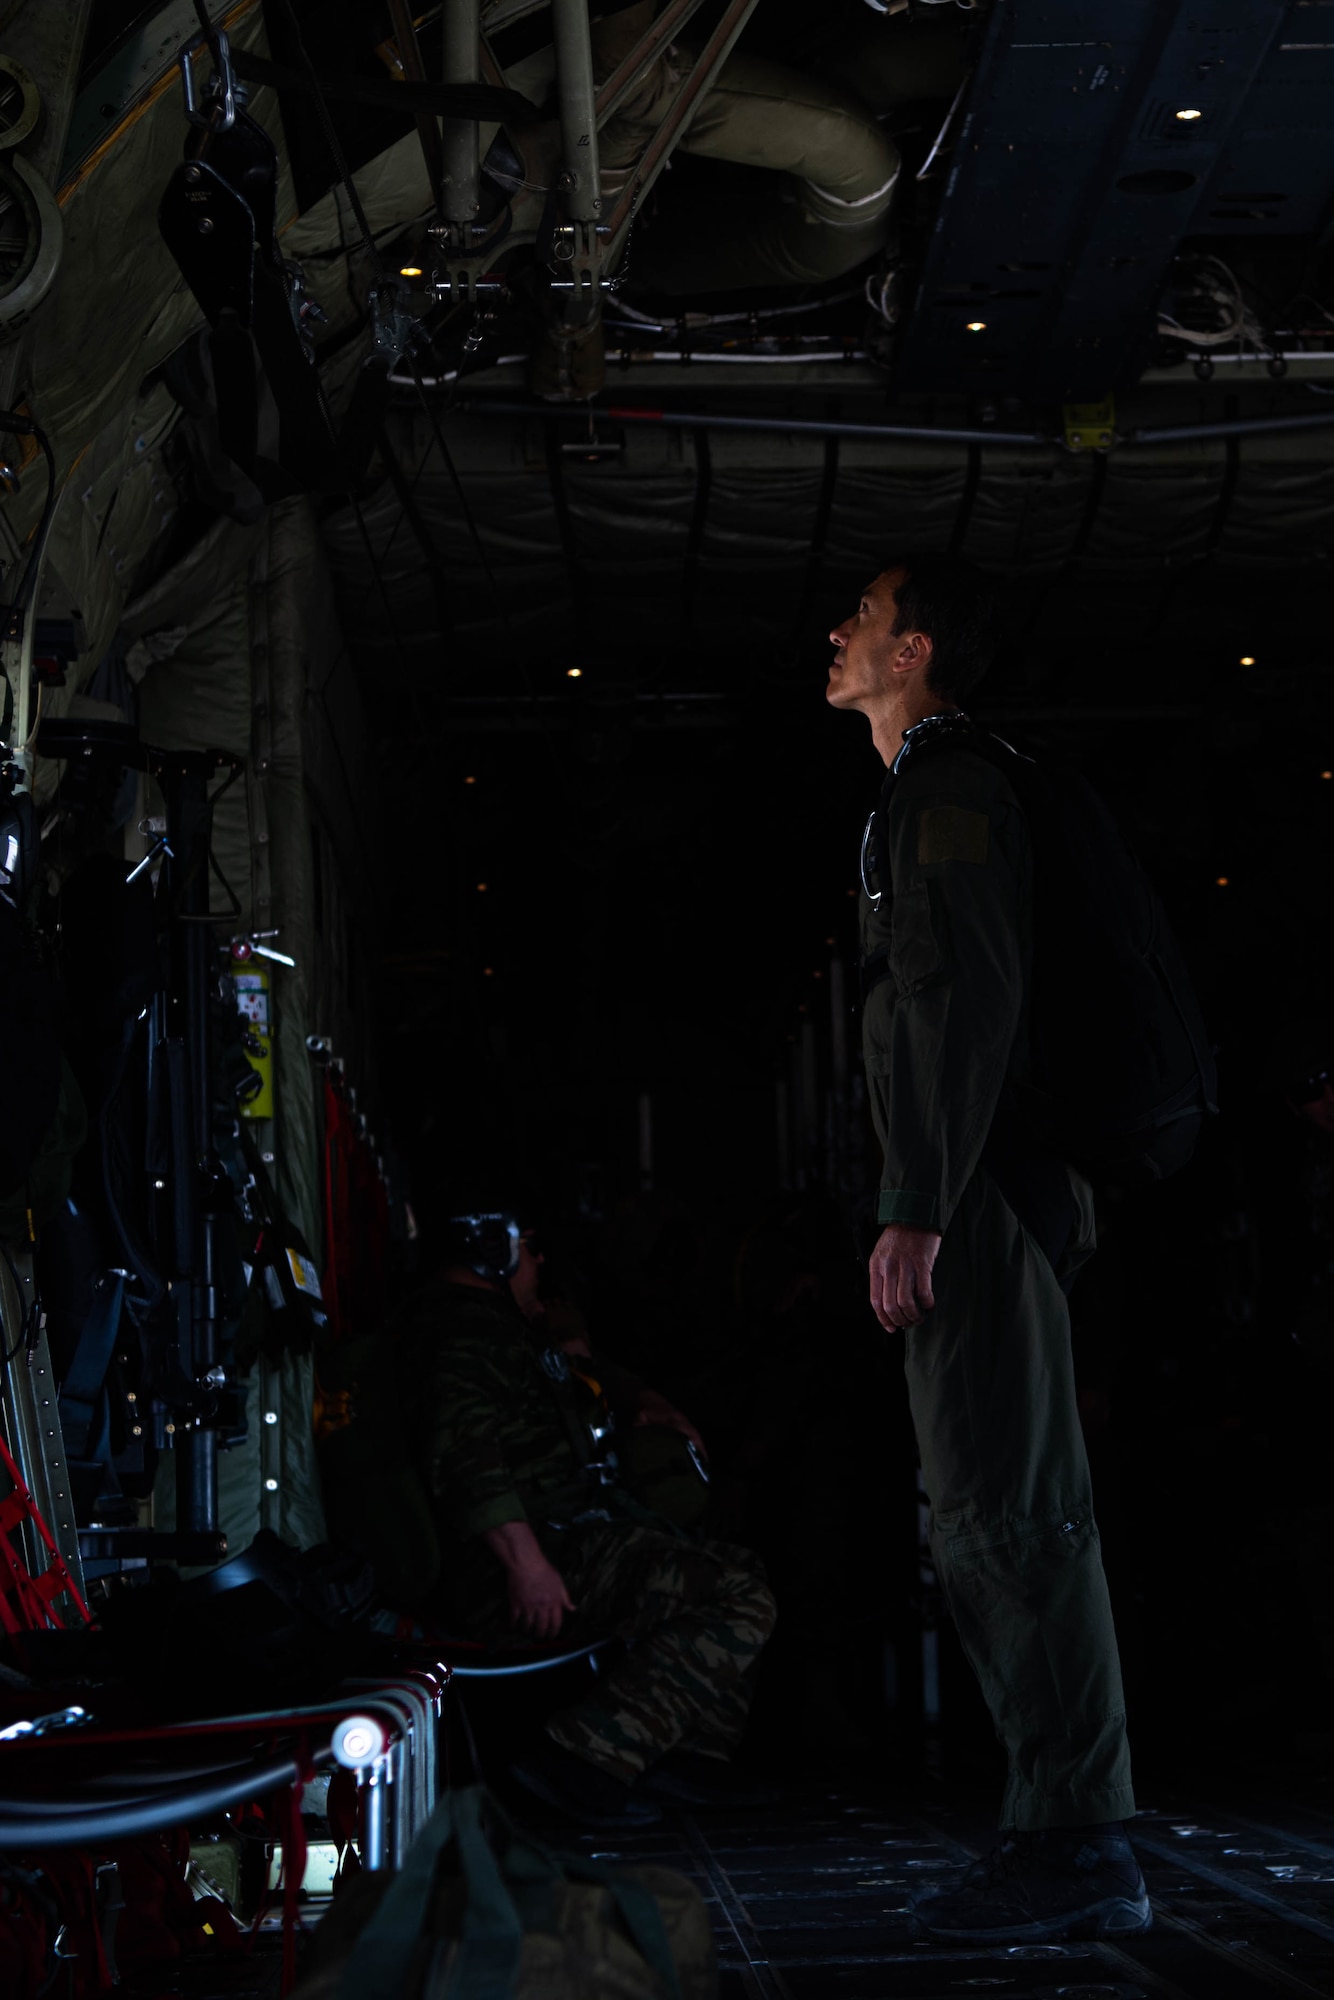 A service member looks up in an aircraft.